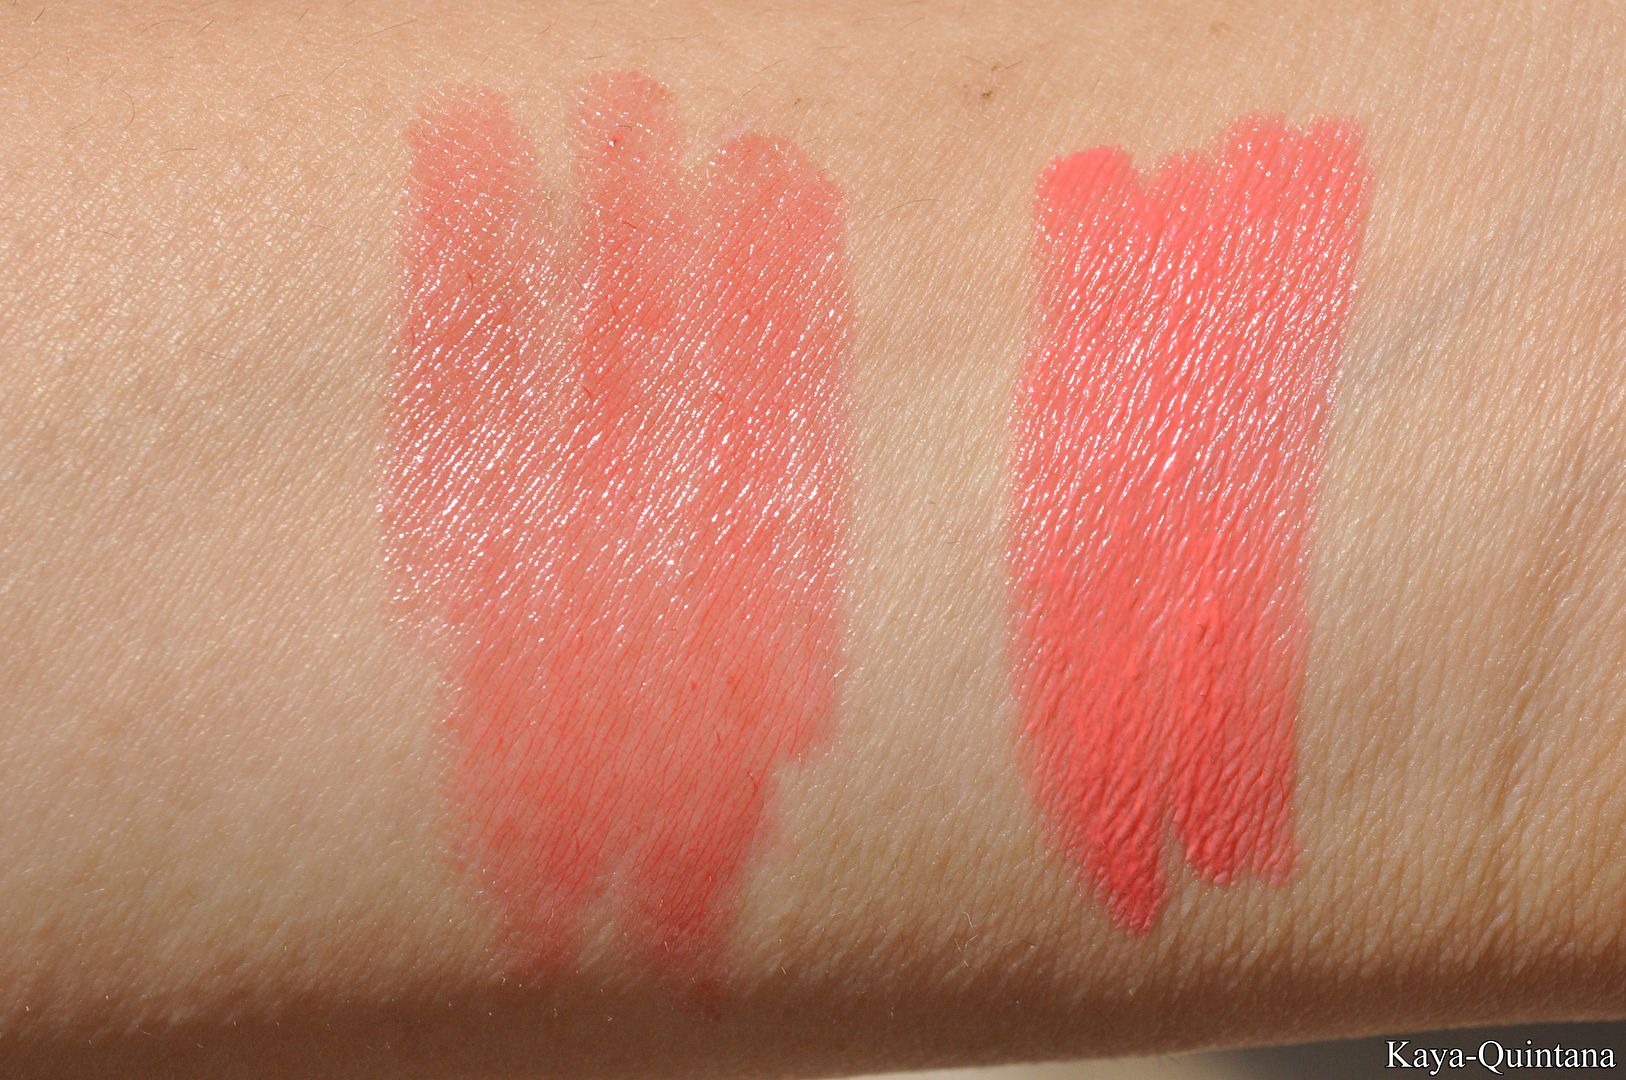 bourjois color boost lipstick swatches